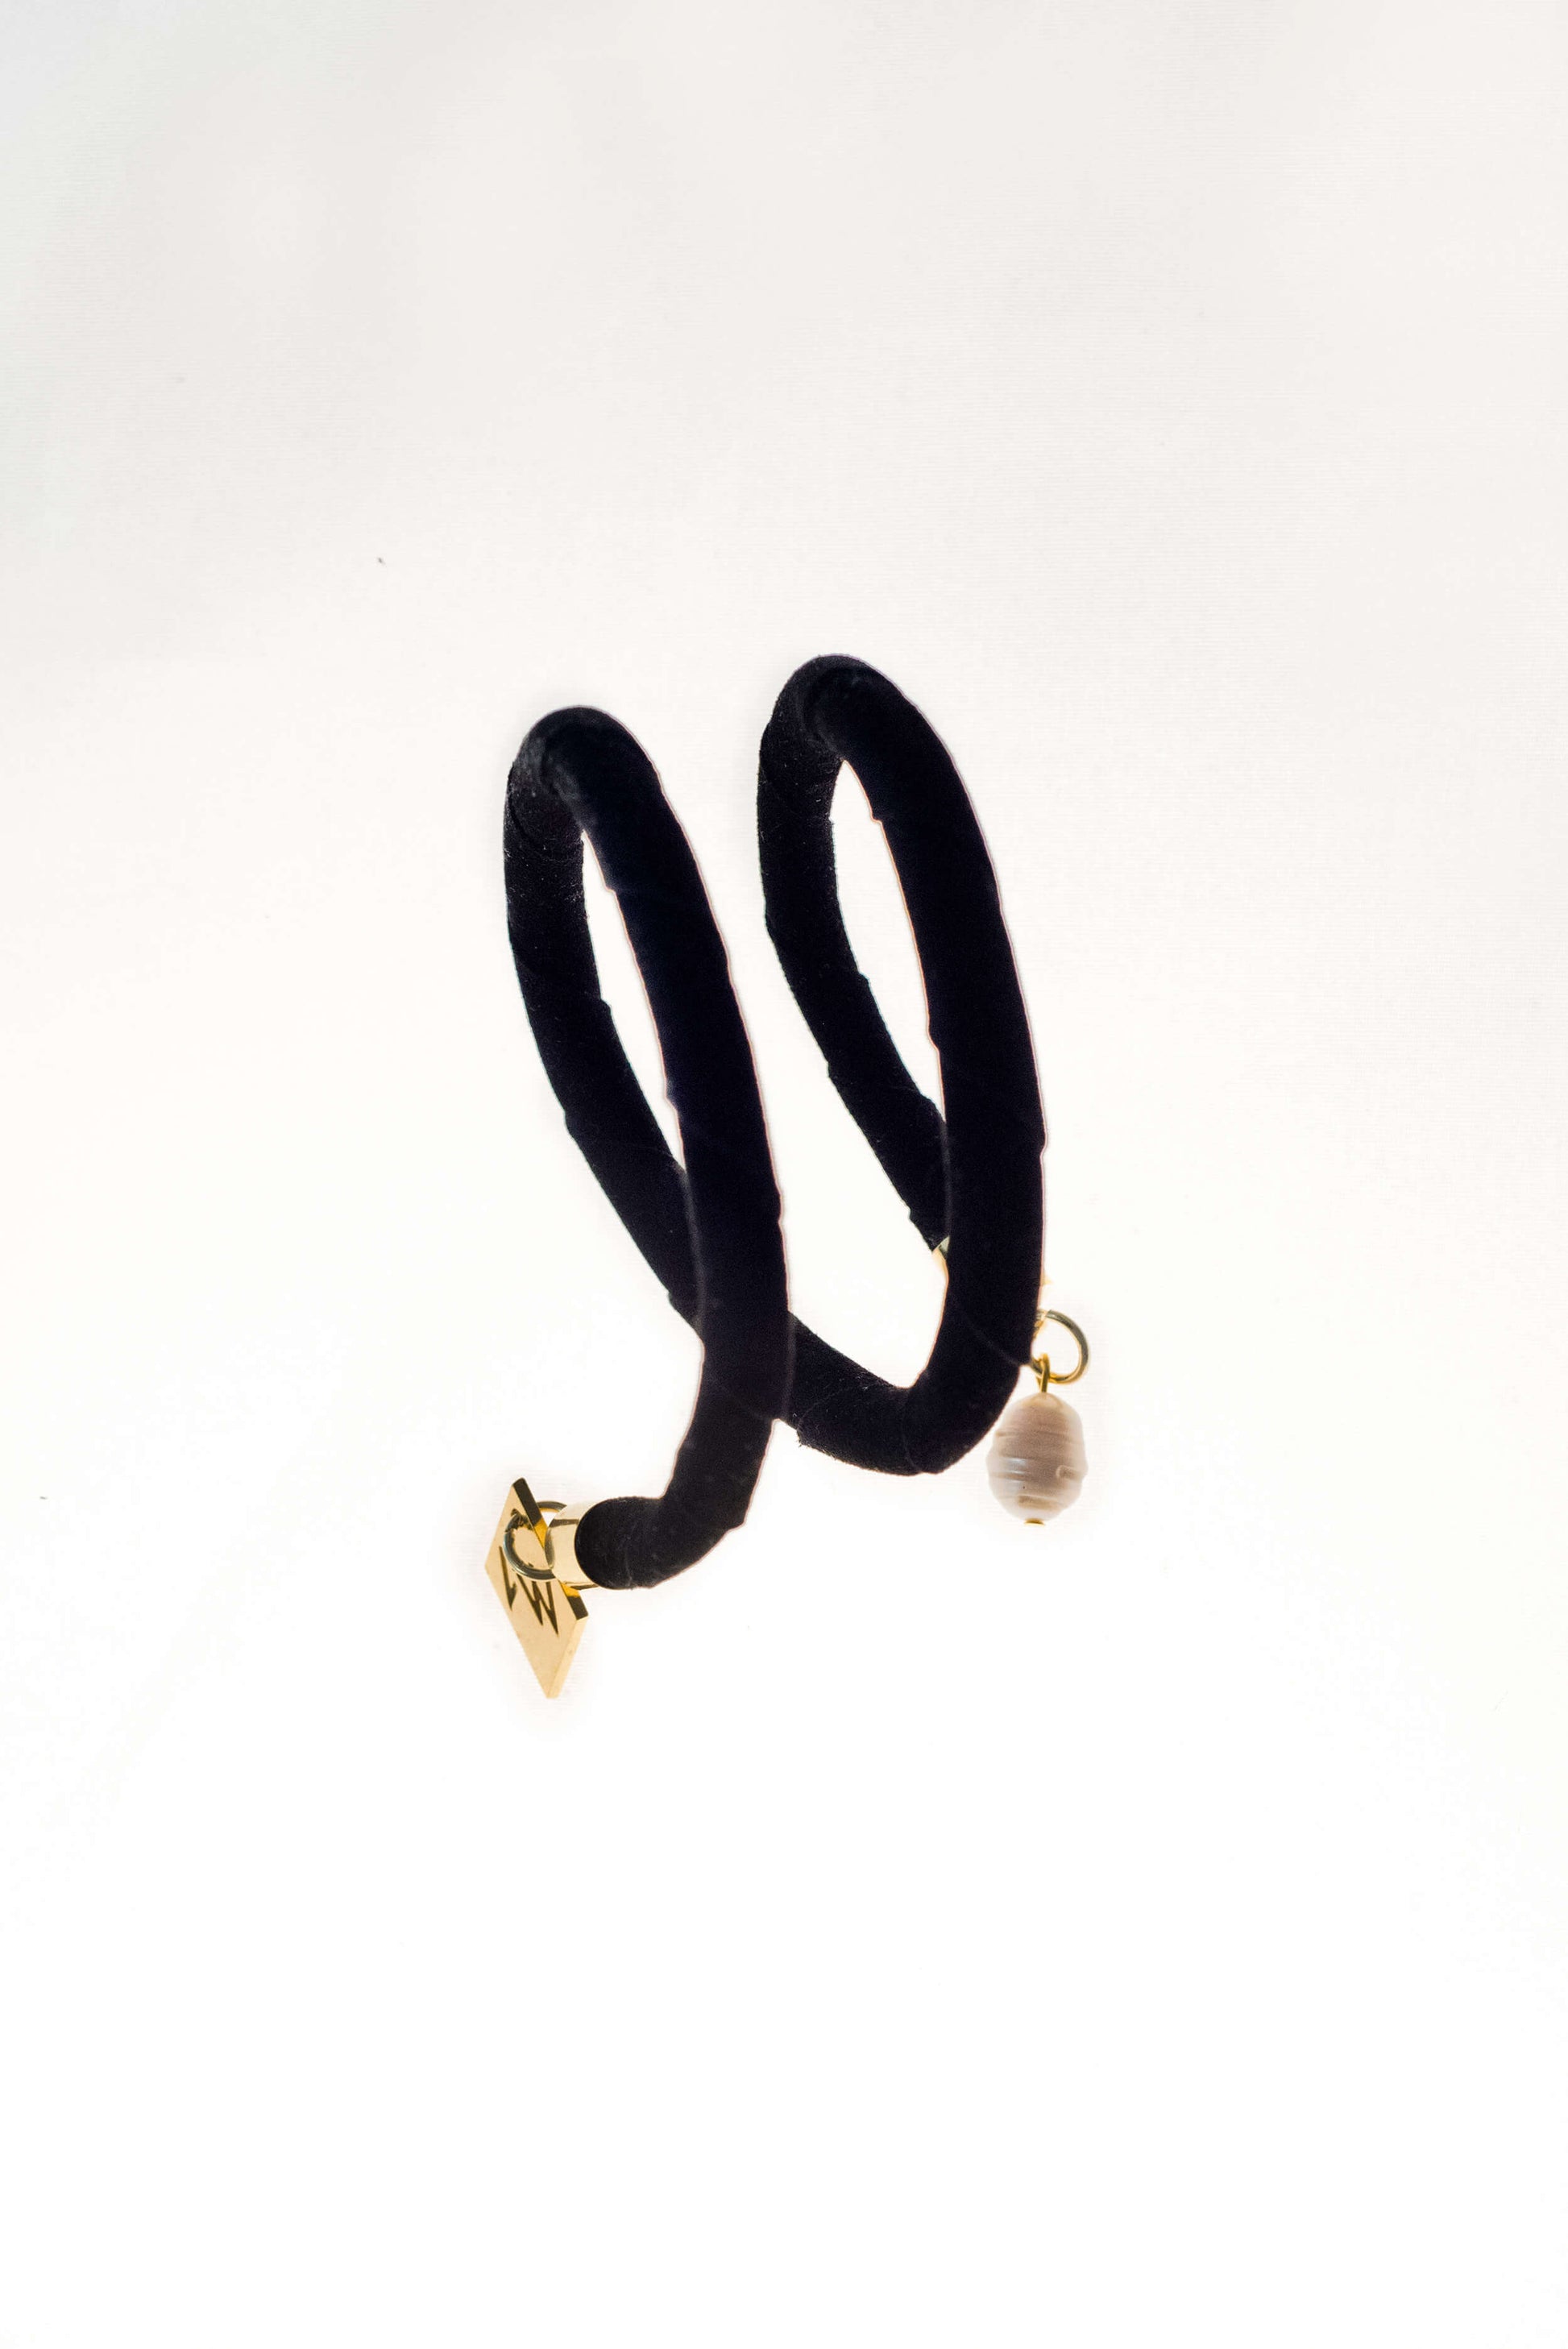 This sculptural cuff is made of finest sheep napa and 24K gold plated brass elements and freshwater pearls.